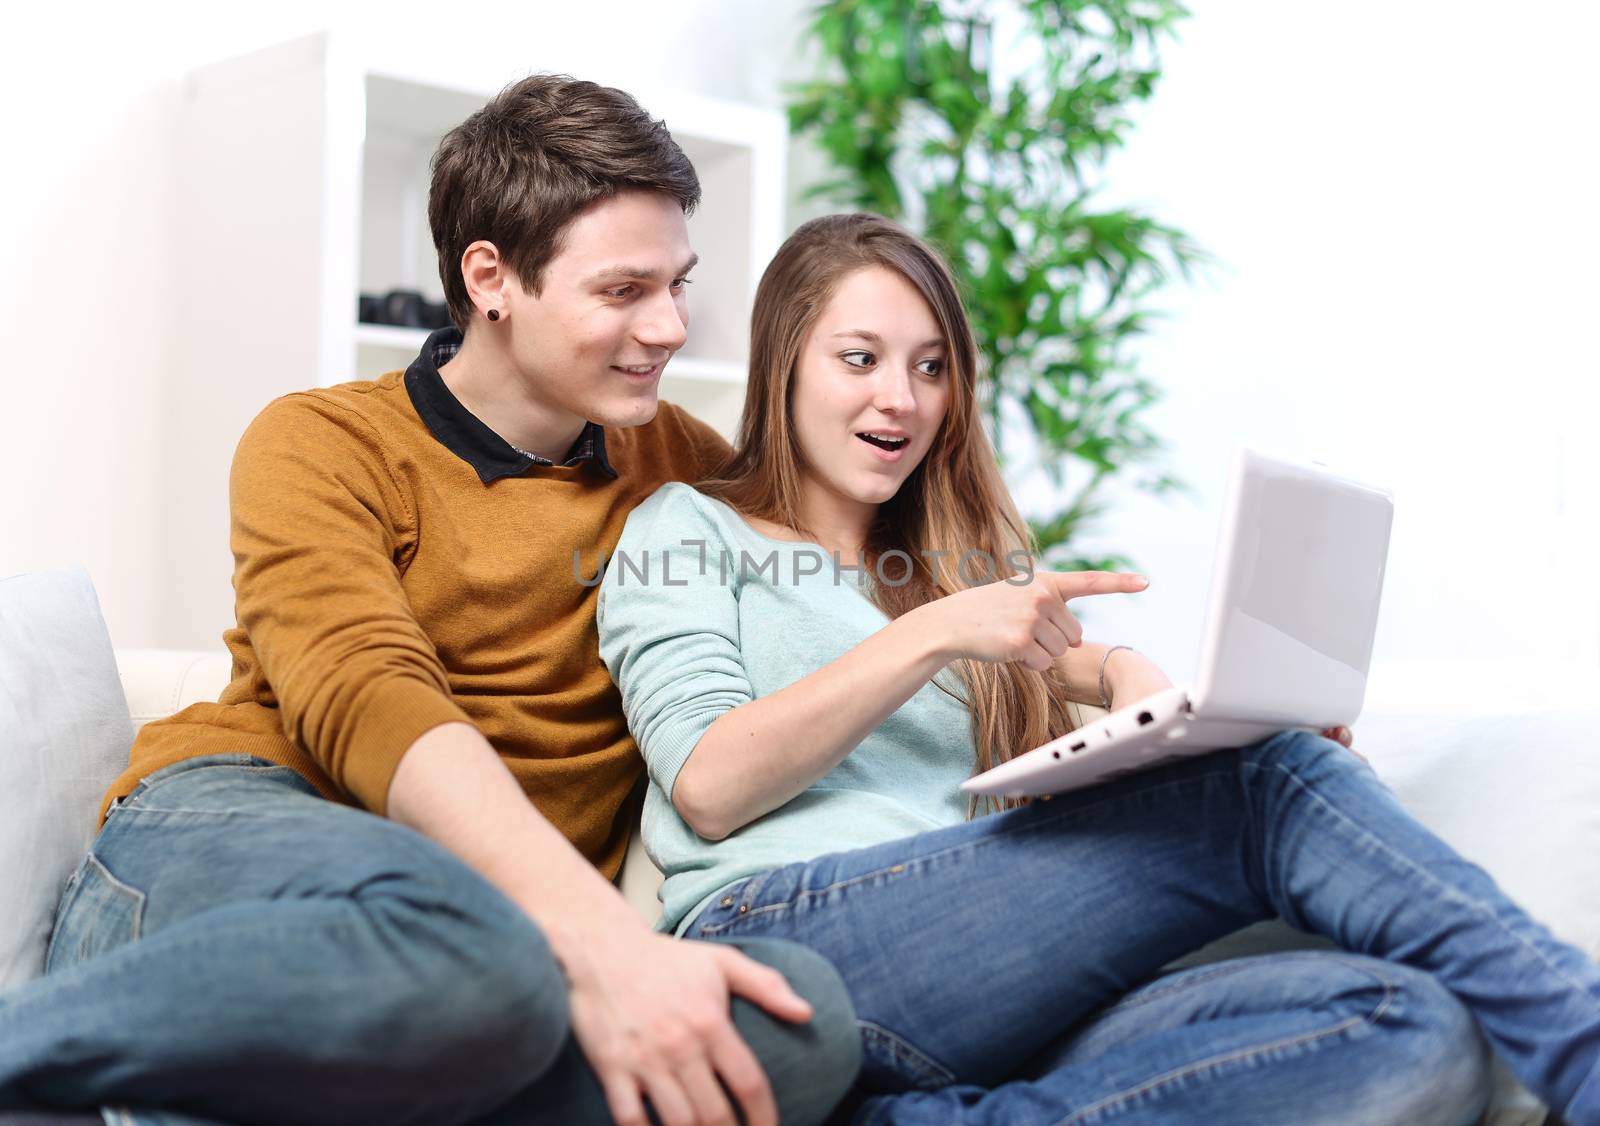 Attractive joyful woman showing something on its laptop computer to her boyfriend